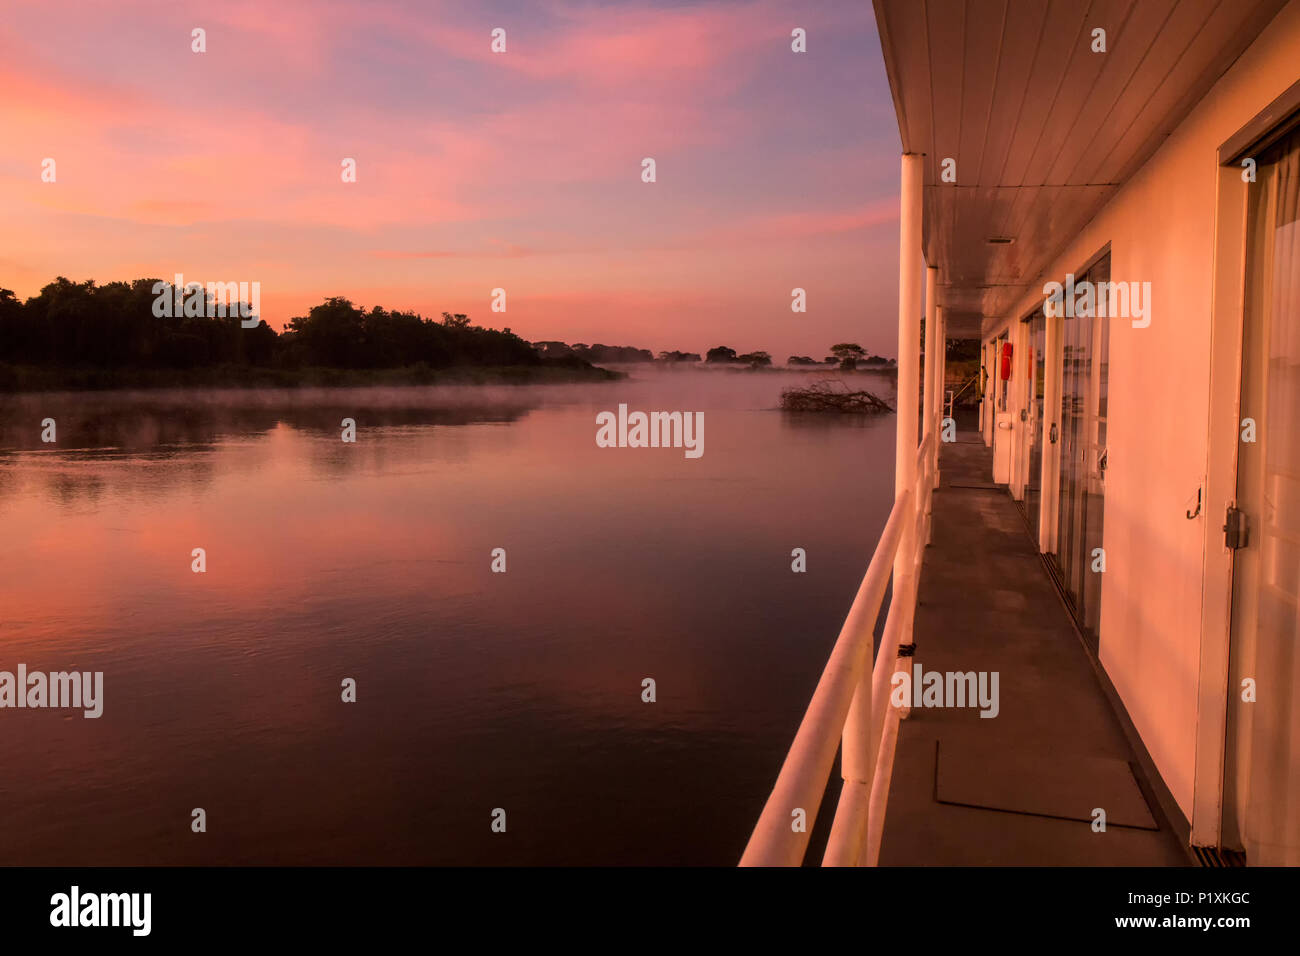 Pantanal region, Mato Grosso, Brazil, South America.  Colorful sunrise on the Cuiaba river, seen from the walkway on a flotel (floating hotel). Stock Photo